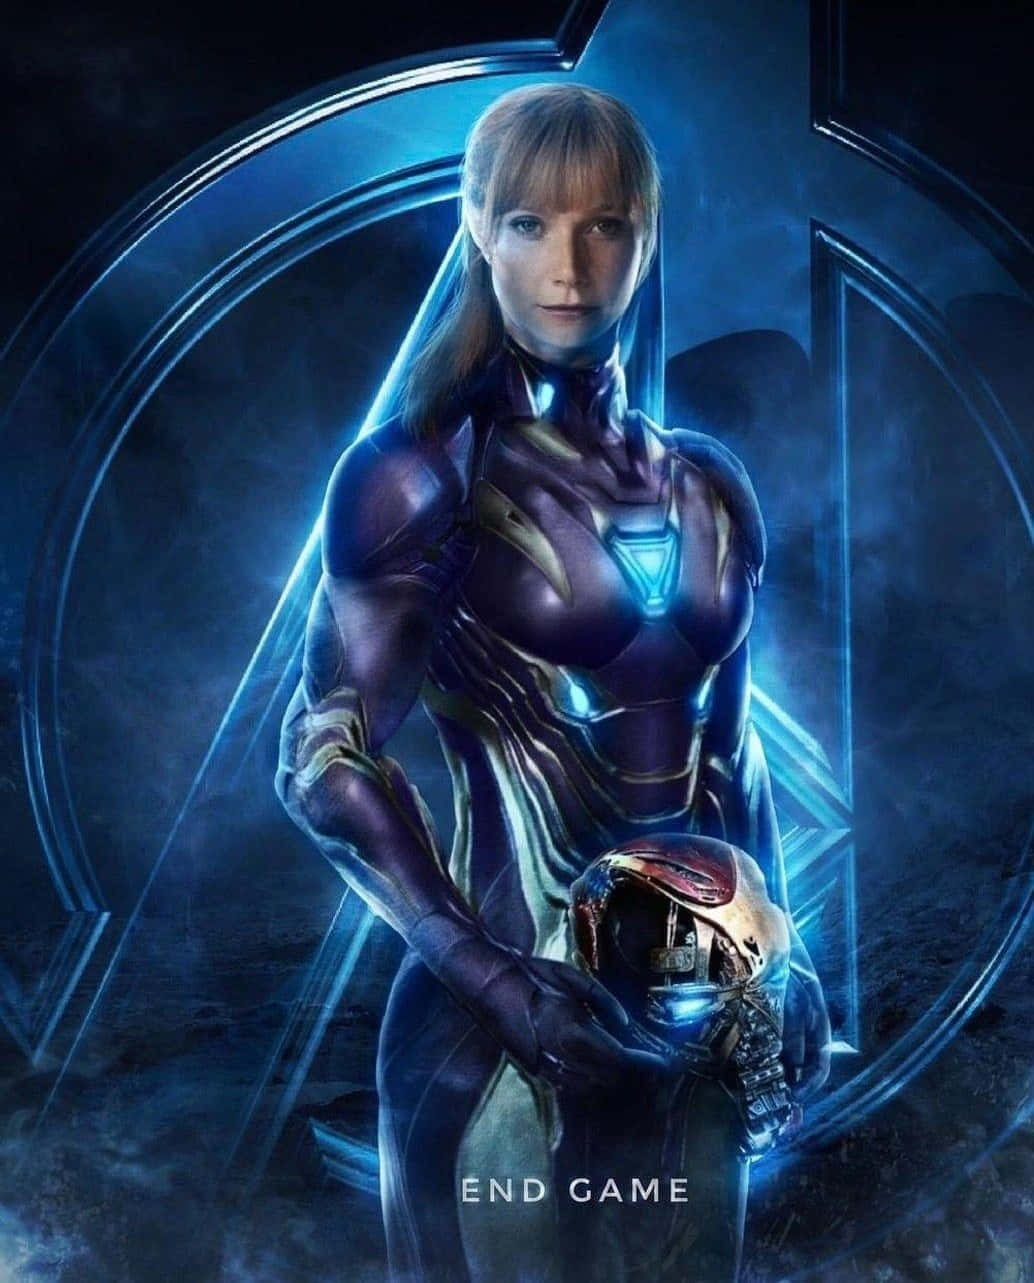 Pepper Potts in a powerful stance Wallpaper